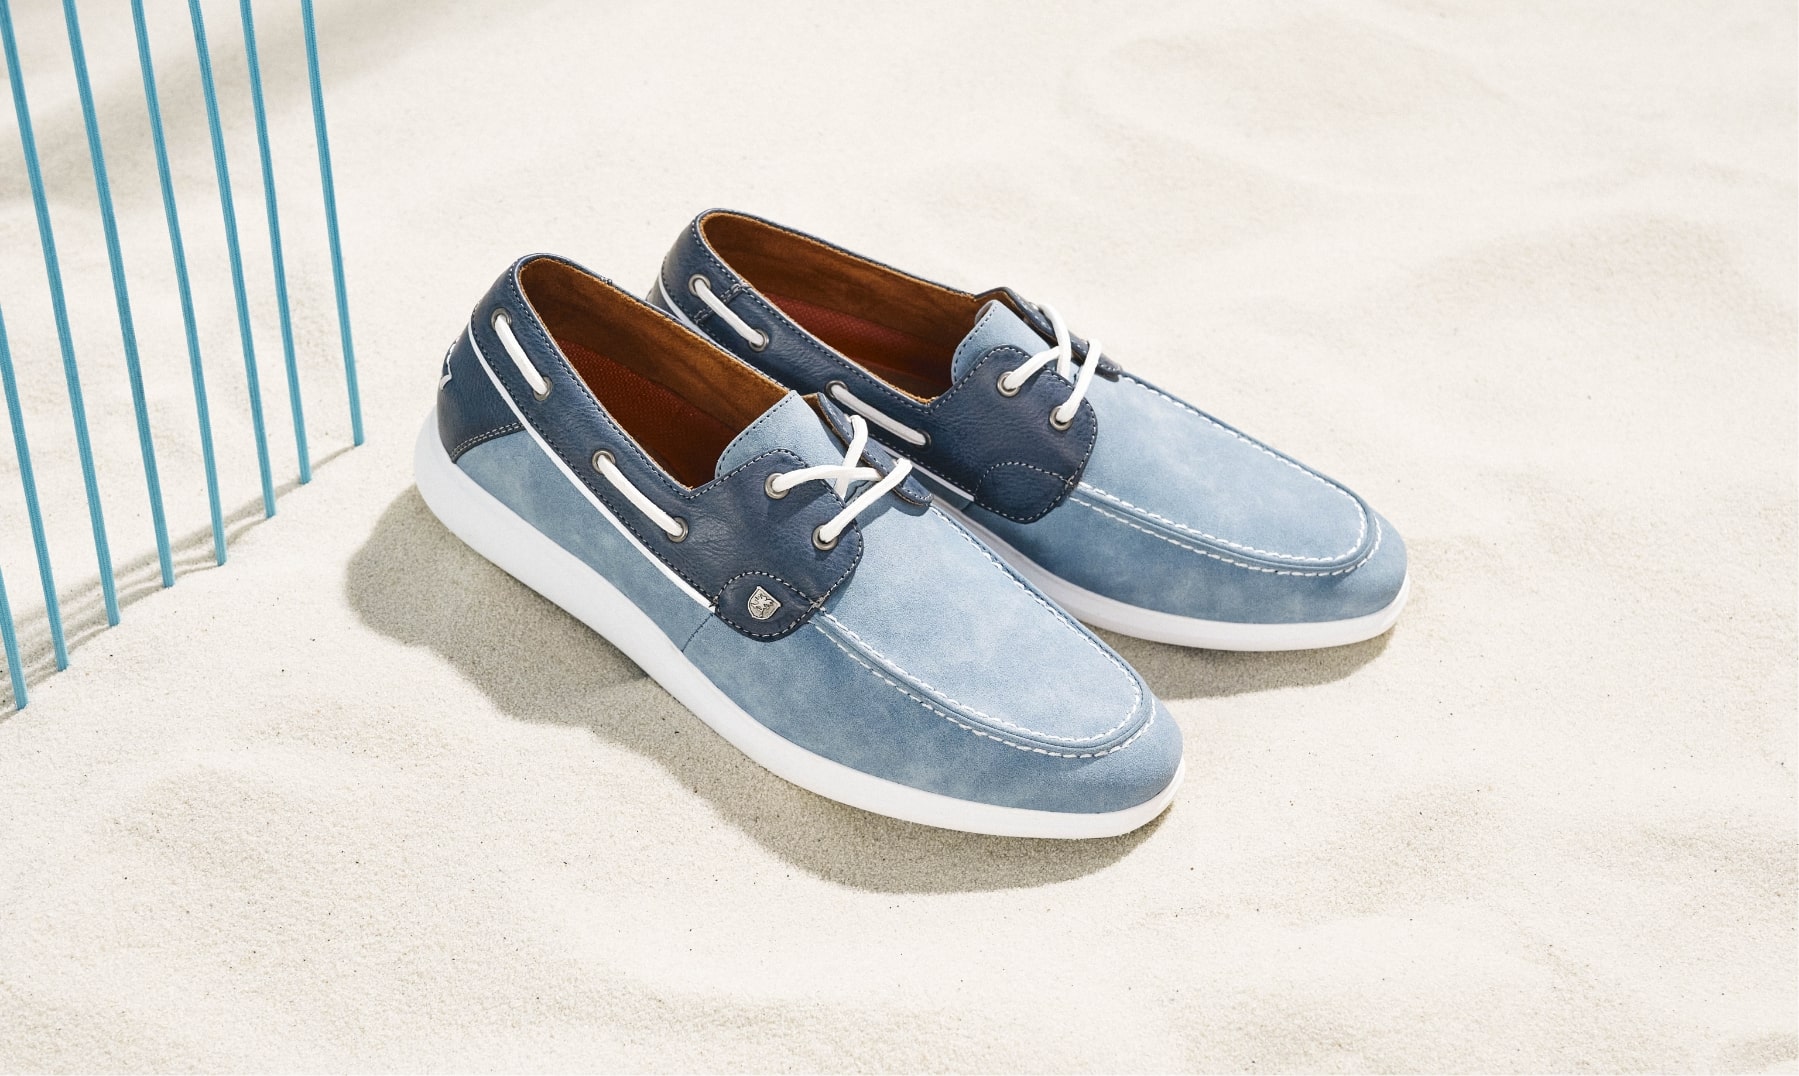 Click to shop Stacy Adams casuals. Image features the Reid in light blue.